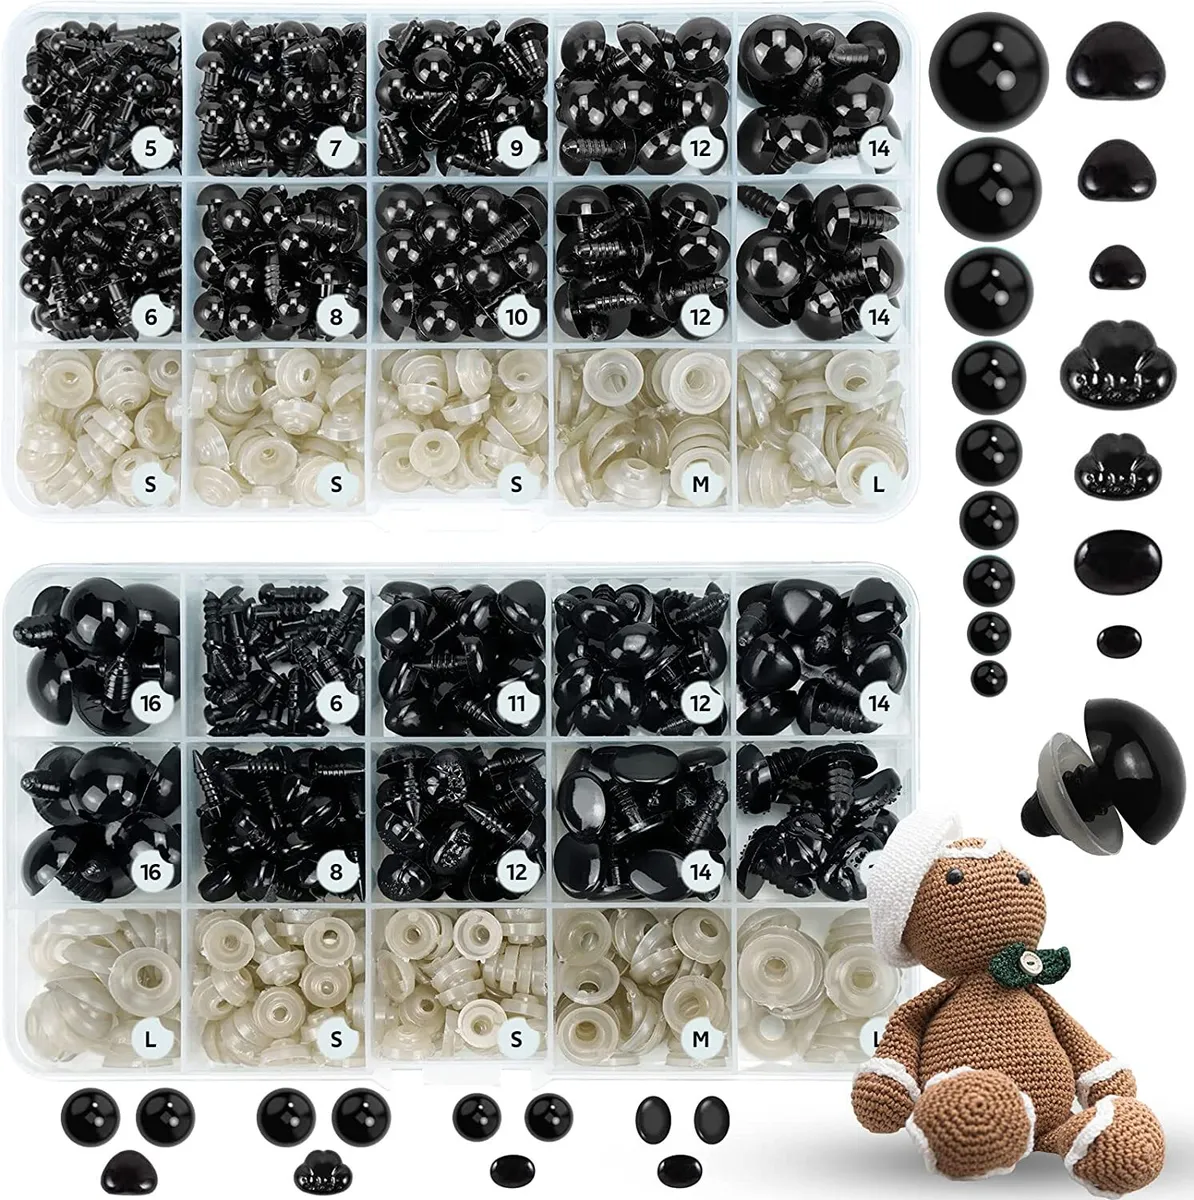 EUCARLOS 800pcs Safety Eyes and Noses for Amigurumi, 2 Boxes Crochet Eyes with Size Chart, Black Plastic Craft Doll Eyes with Washers for Crochet